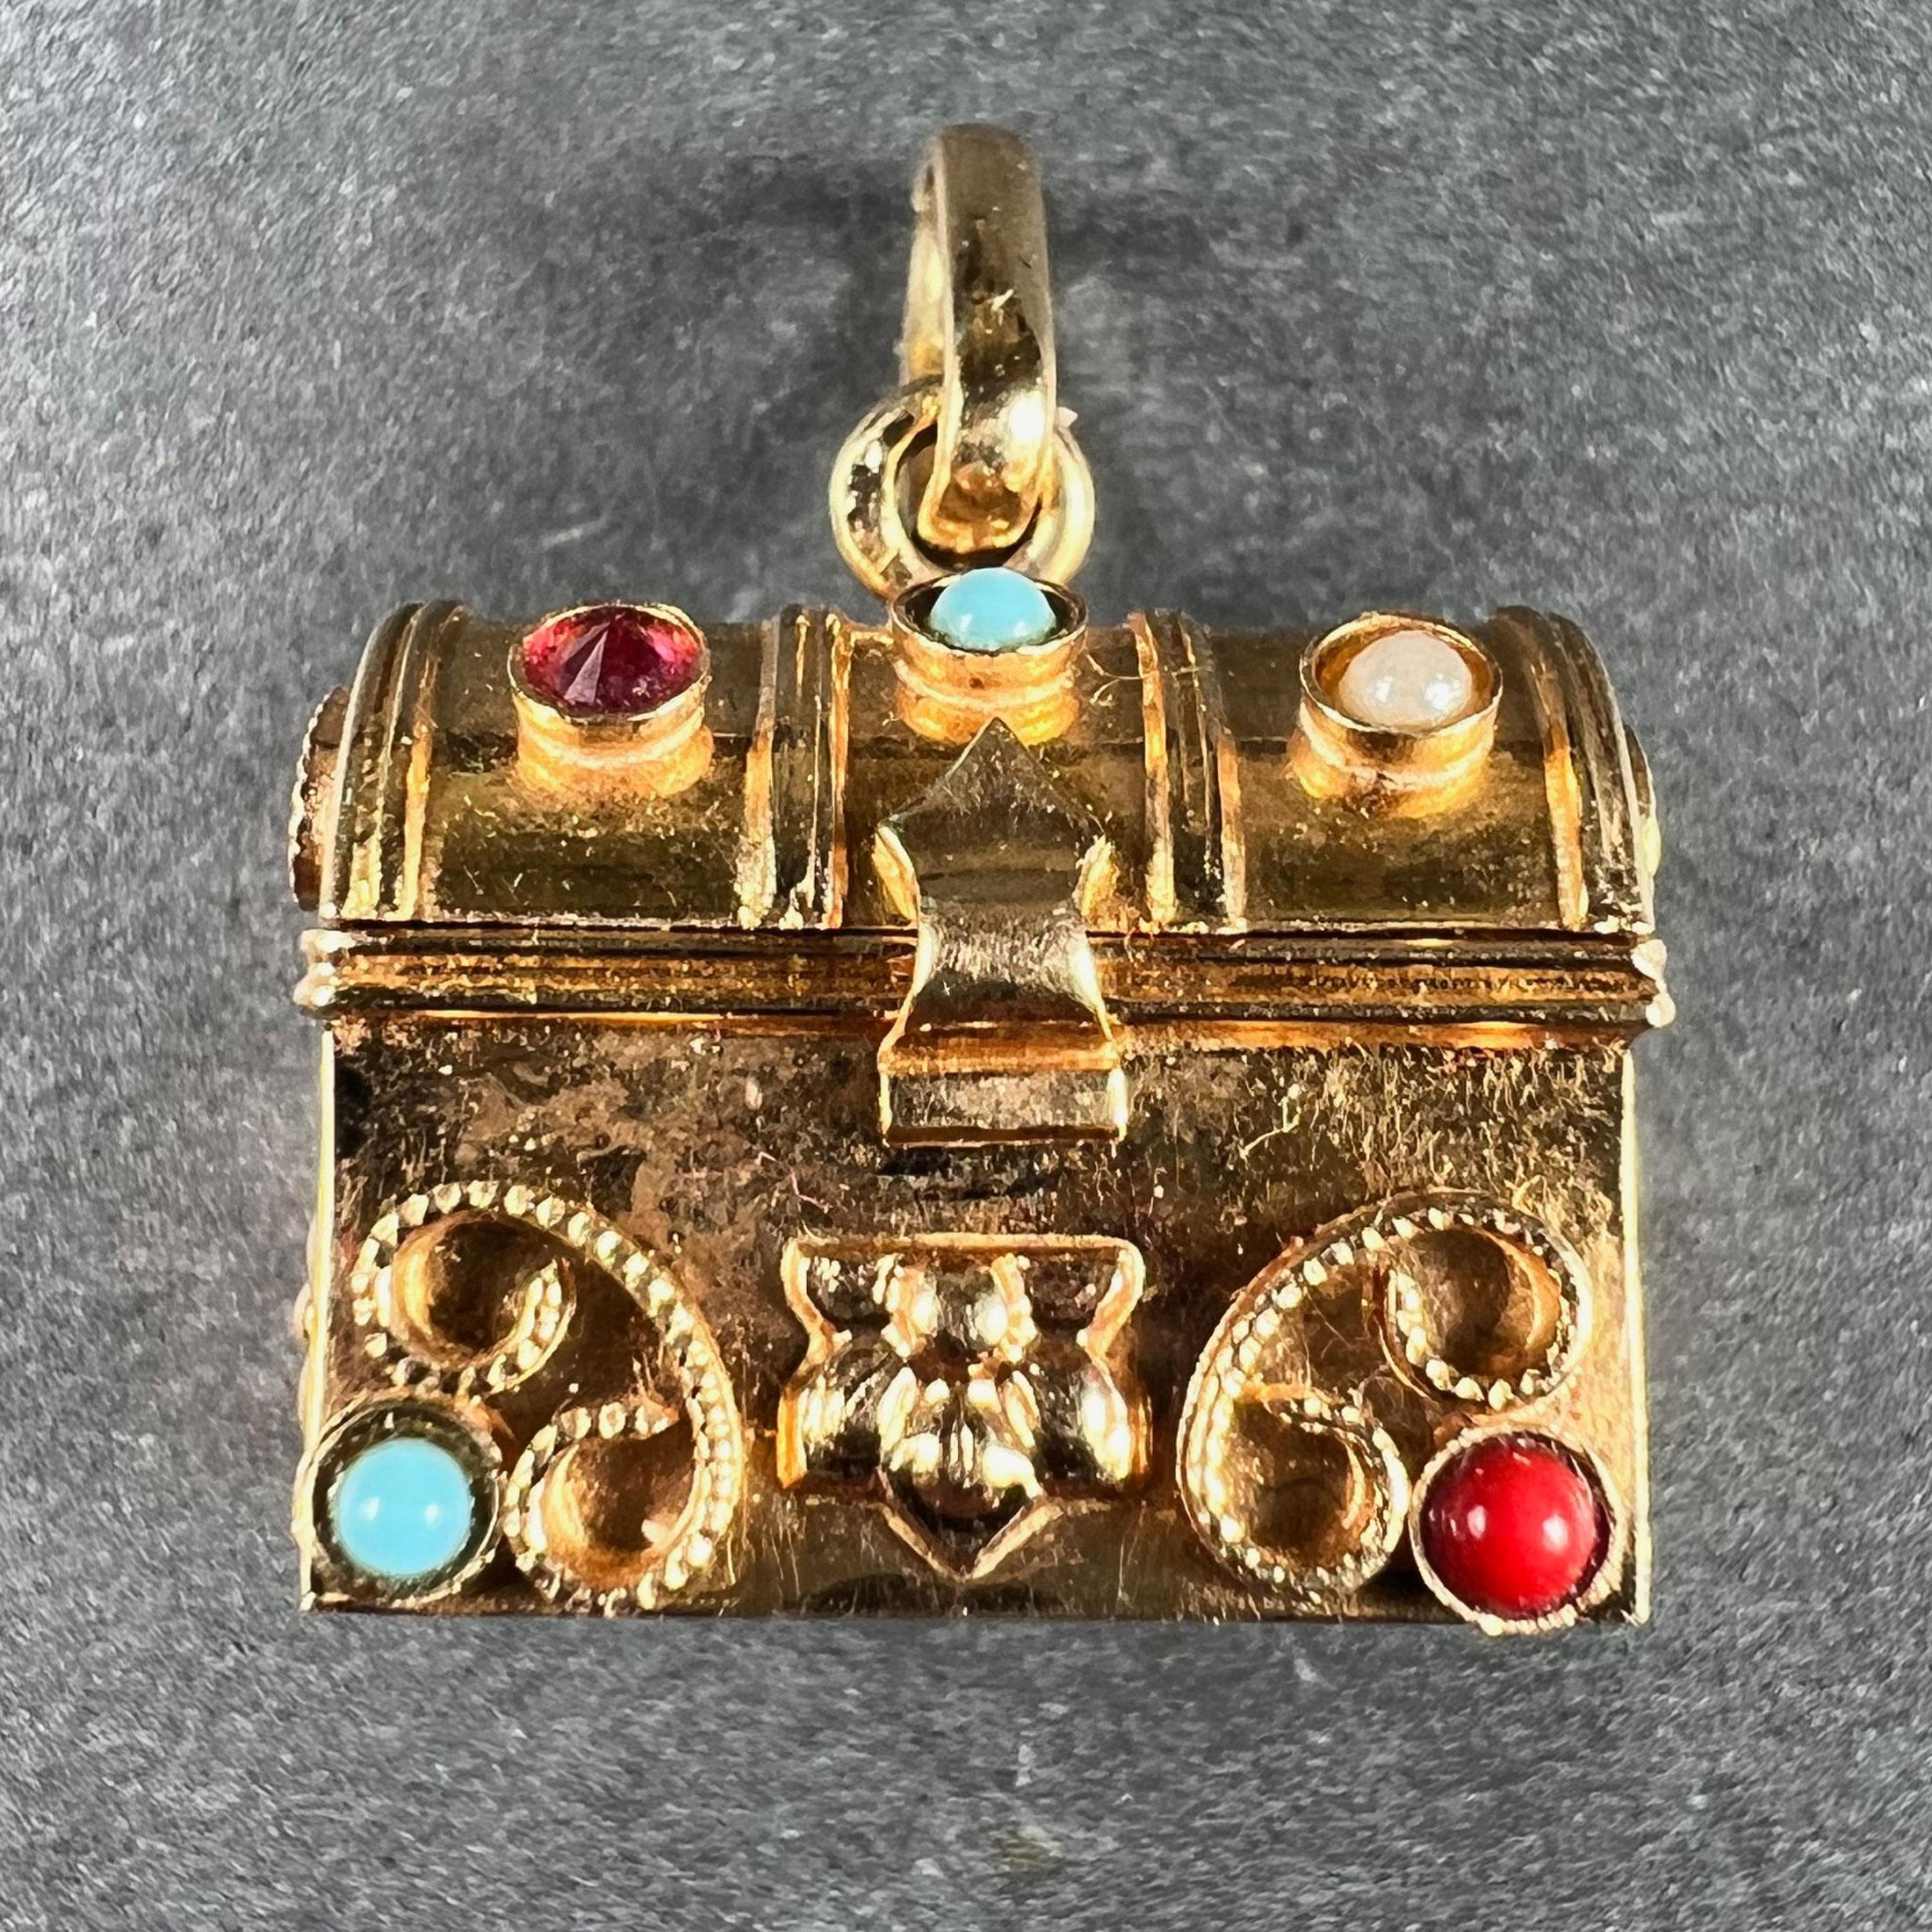 A French 18 karat (18K) yellow gold charm pendant designed as a mechanical gem set treasure chest, opening to reveal a gemstone booty within. The exterior is set with paste and imitation pearls, the interior with paste gems. Stamped with the eagle's